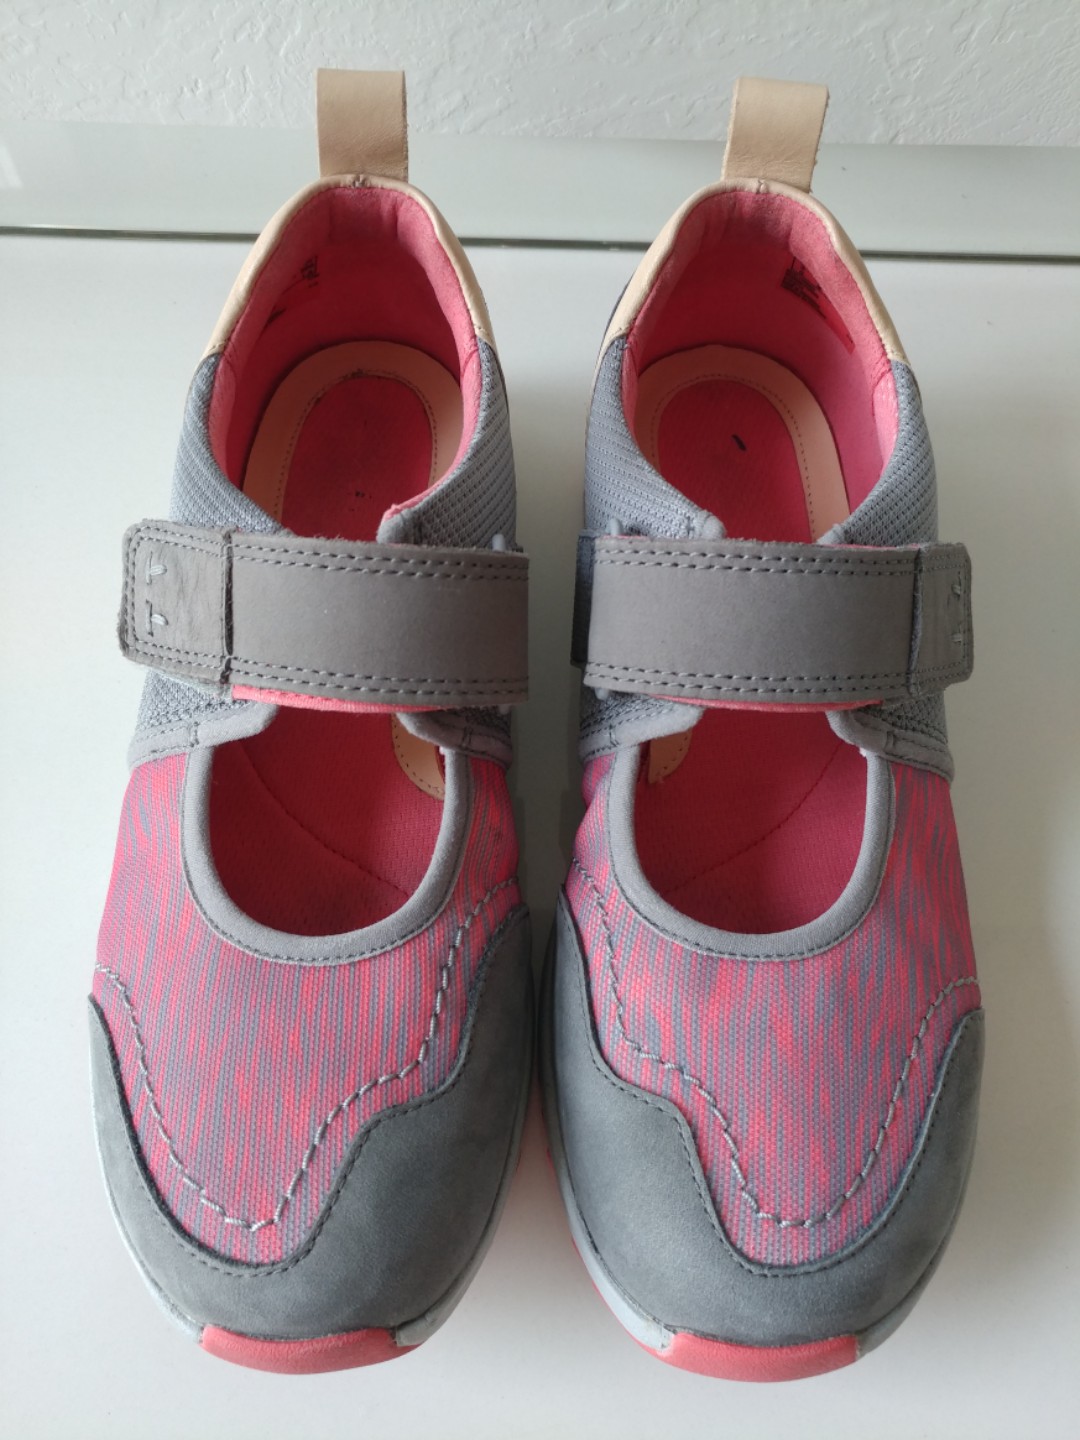 clarks ladies mary jane shoes